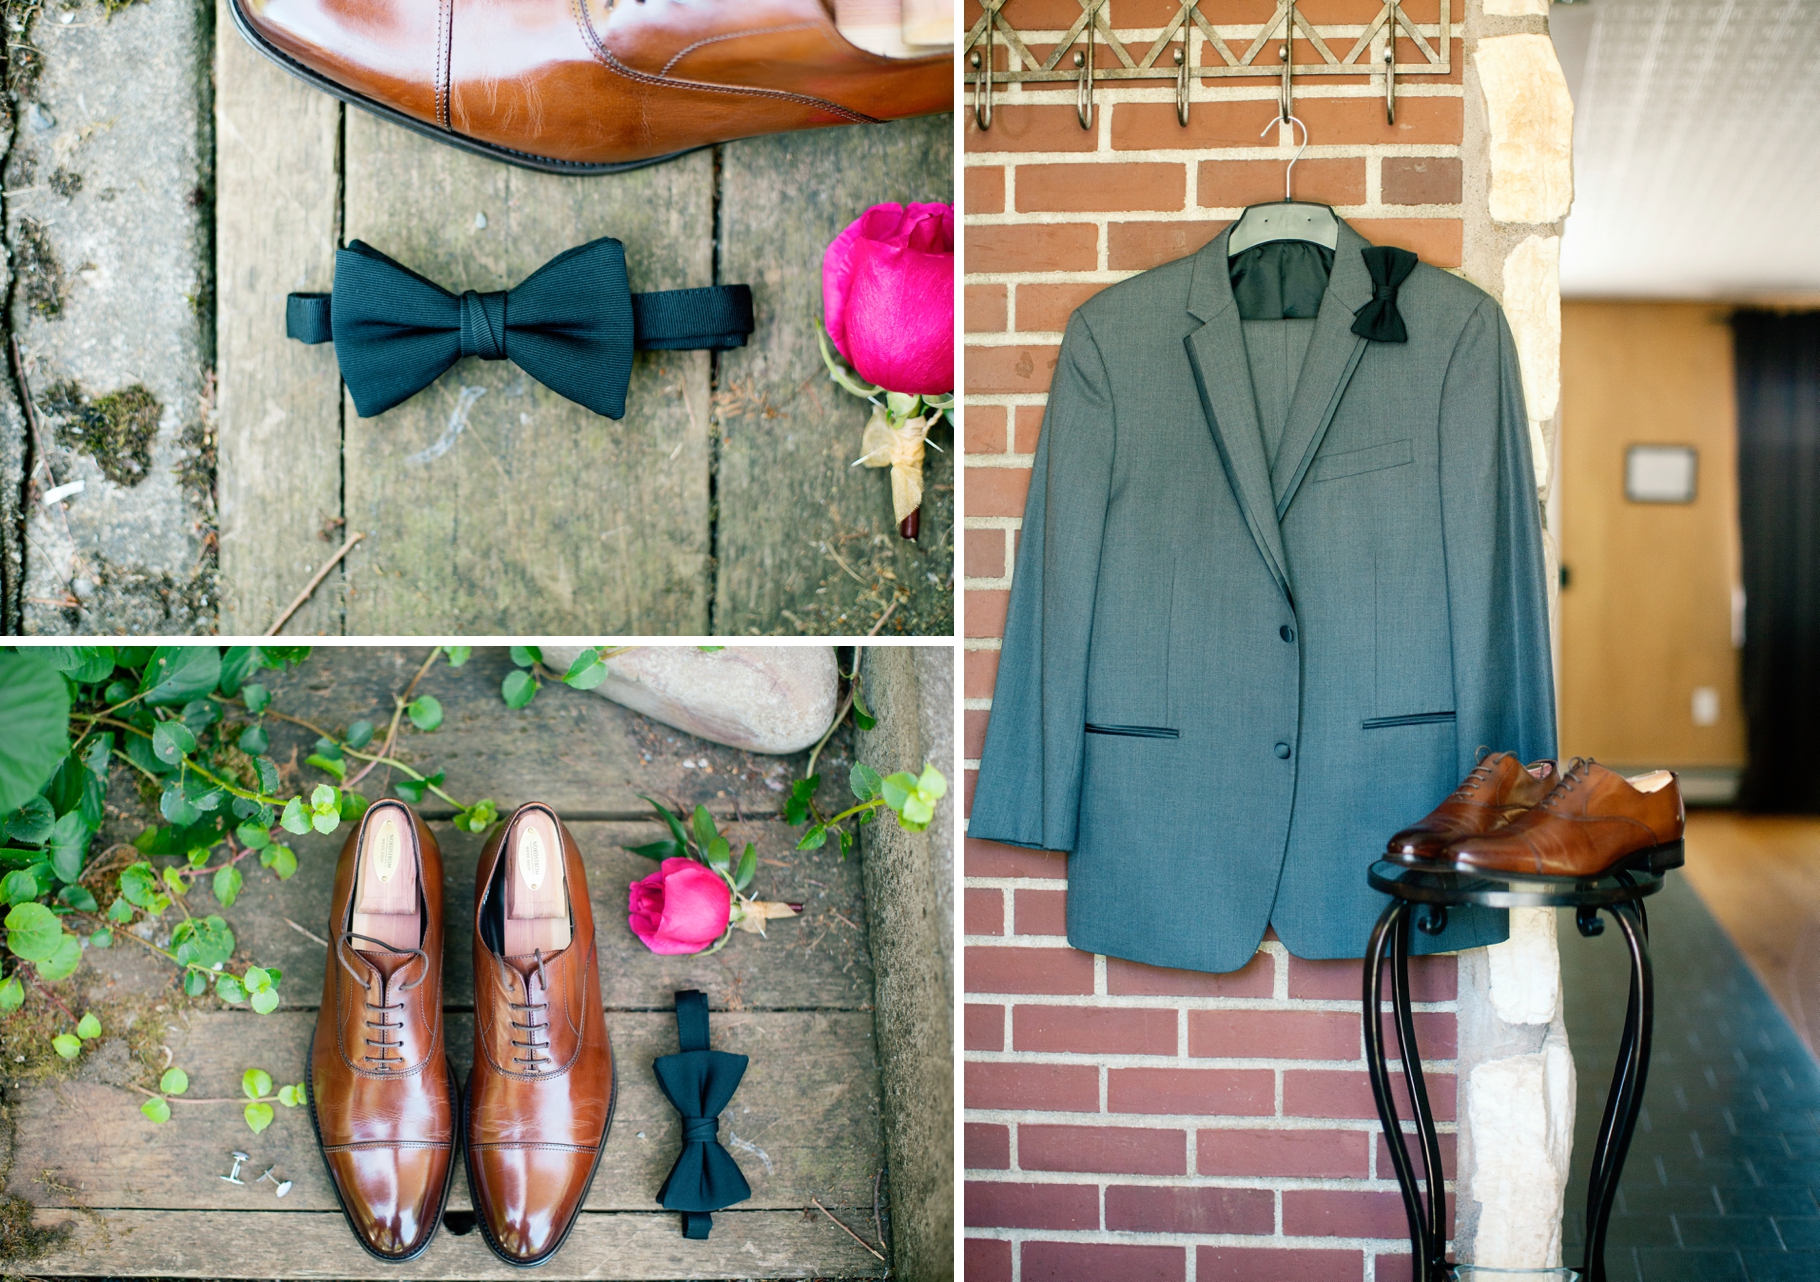 5-Grooms-Suit-Gray-Details-Classic-Bow-Tie-Rock-Creek-Gardens-Seattle-Wedding-Photography-by-Betty-Elaine